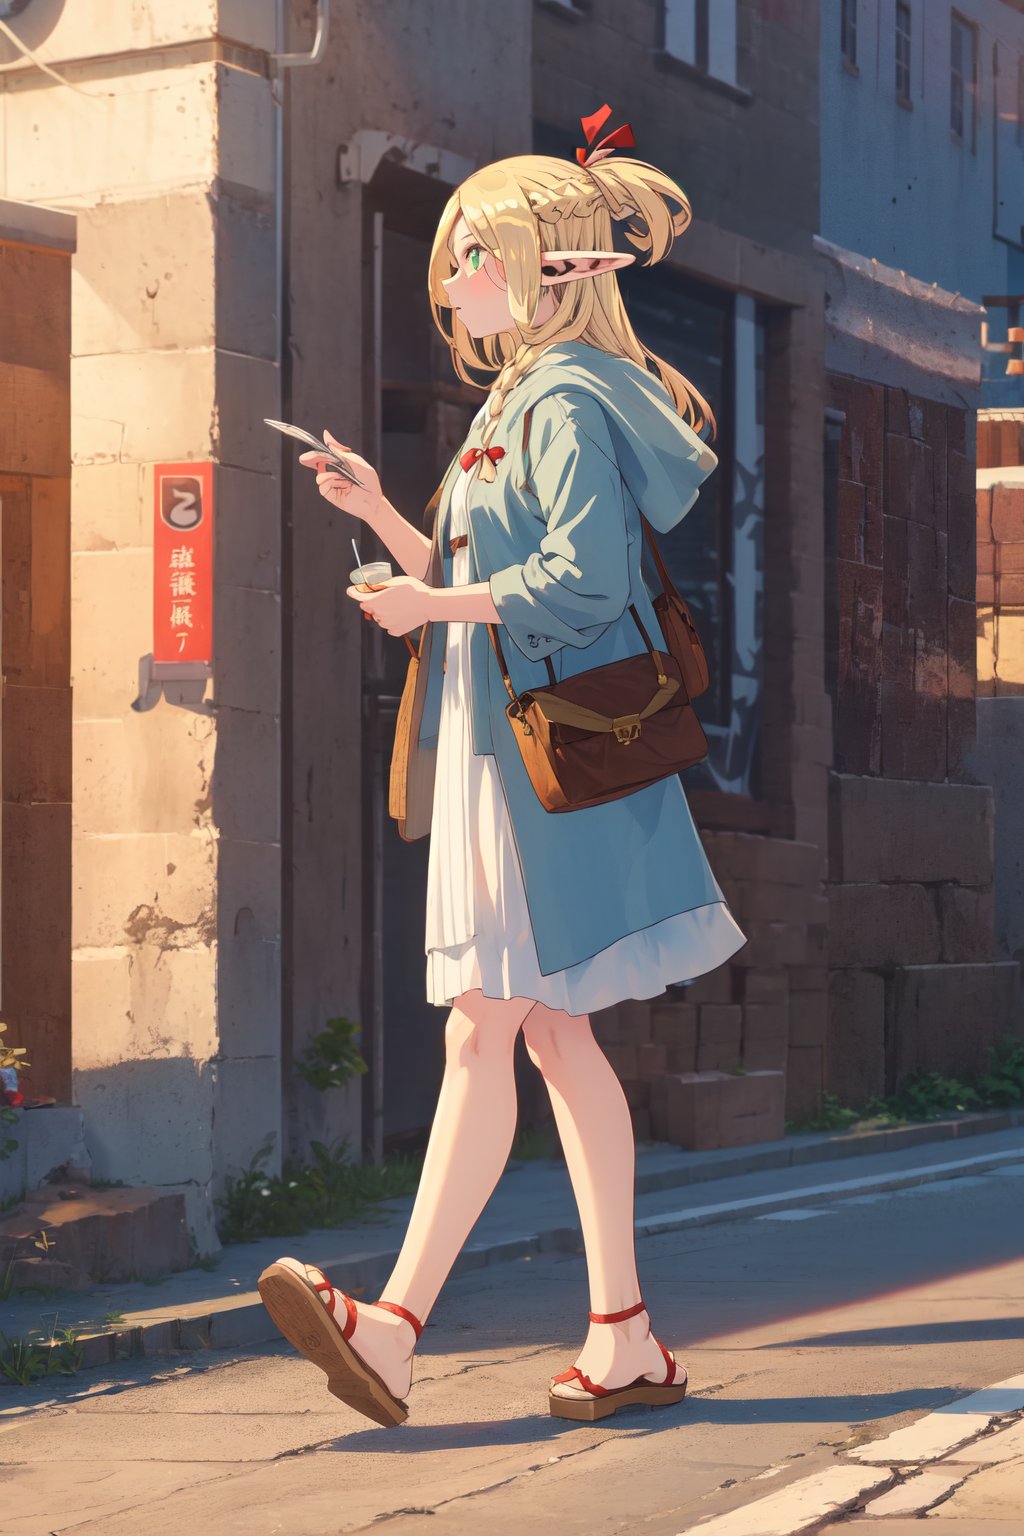 dmeshimarcil, casual clothes, strolling through city, sideview, full body shot